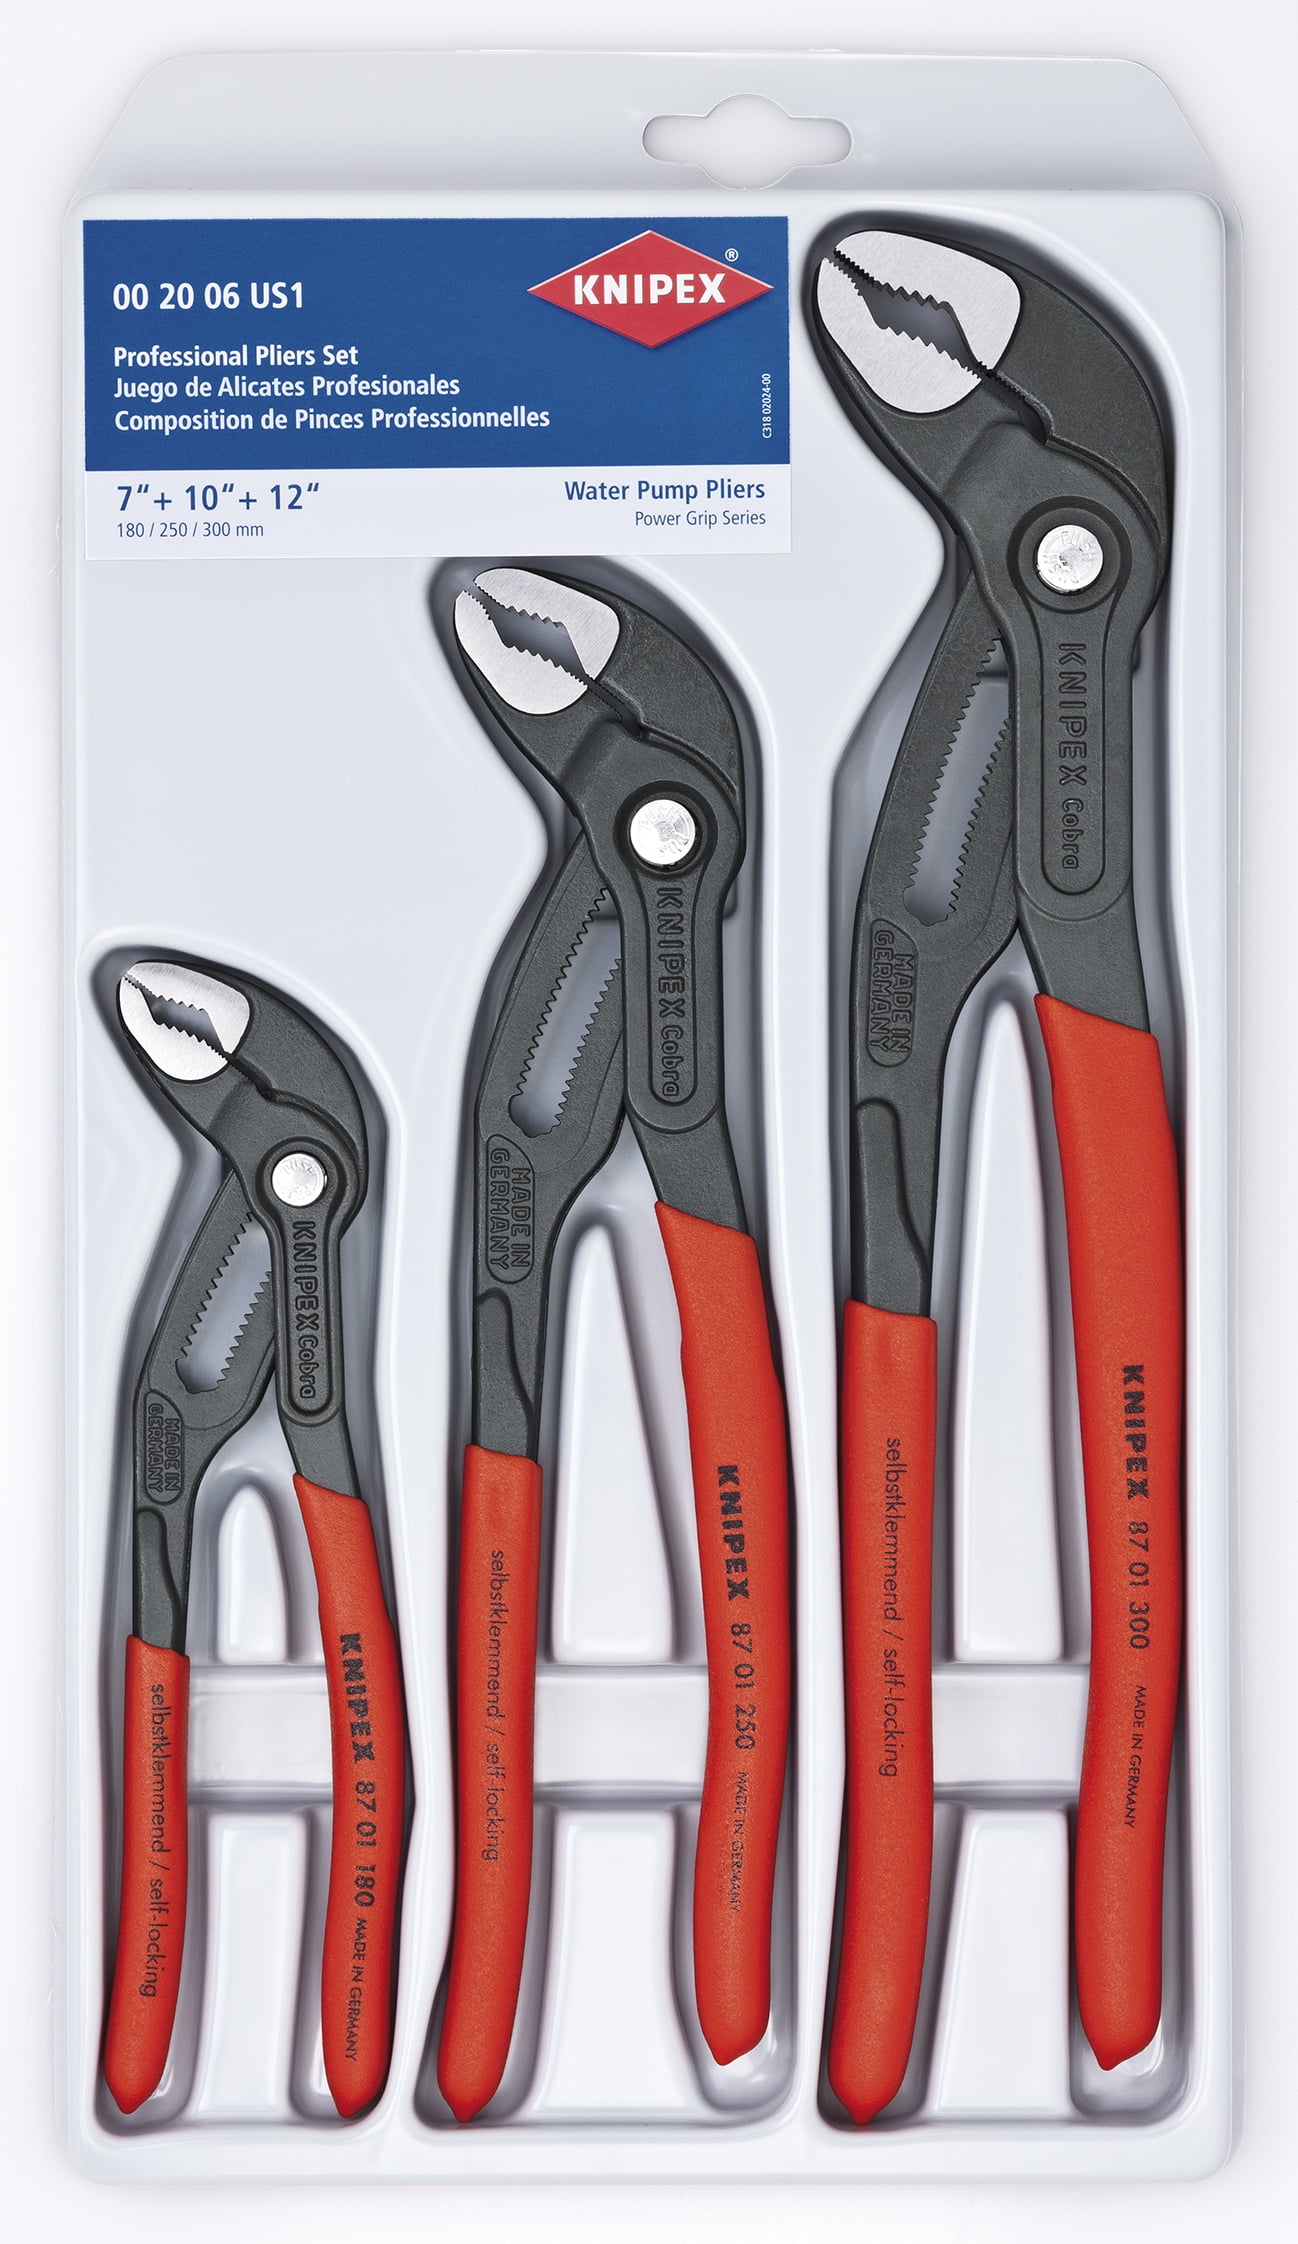 10" and 12" Knipex 3 Piece Cobra Pliers Set Includes 7" 